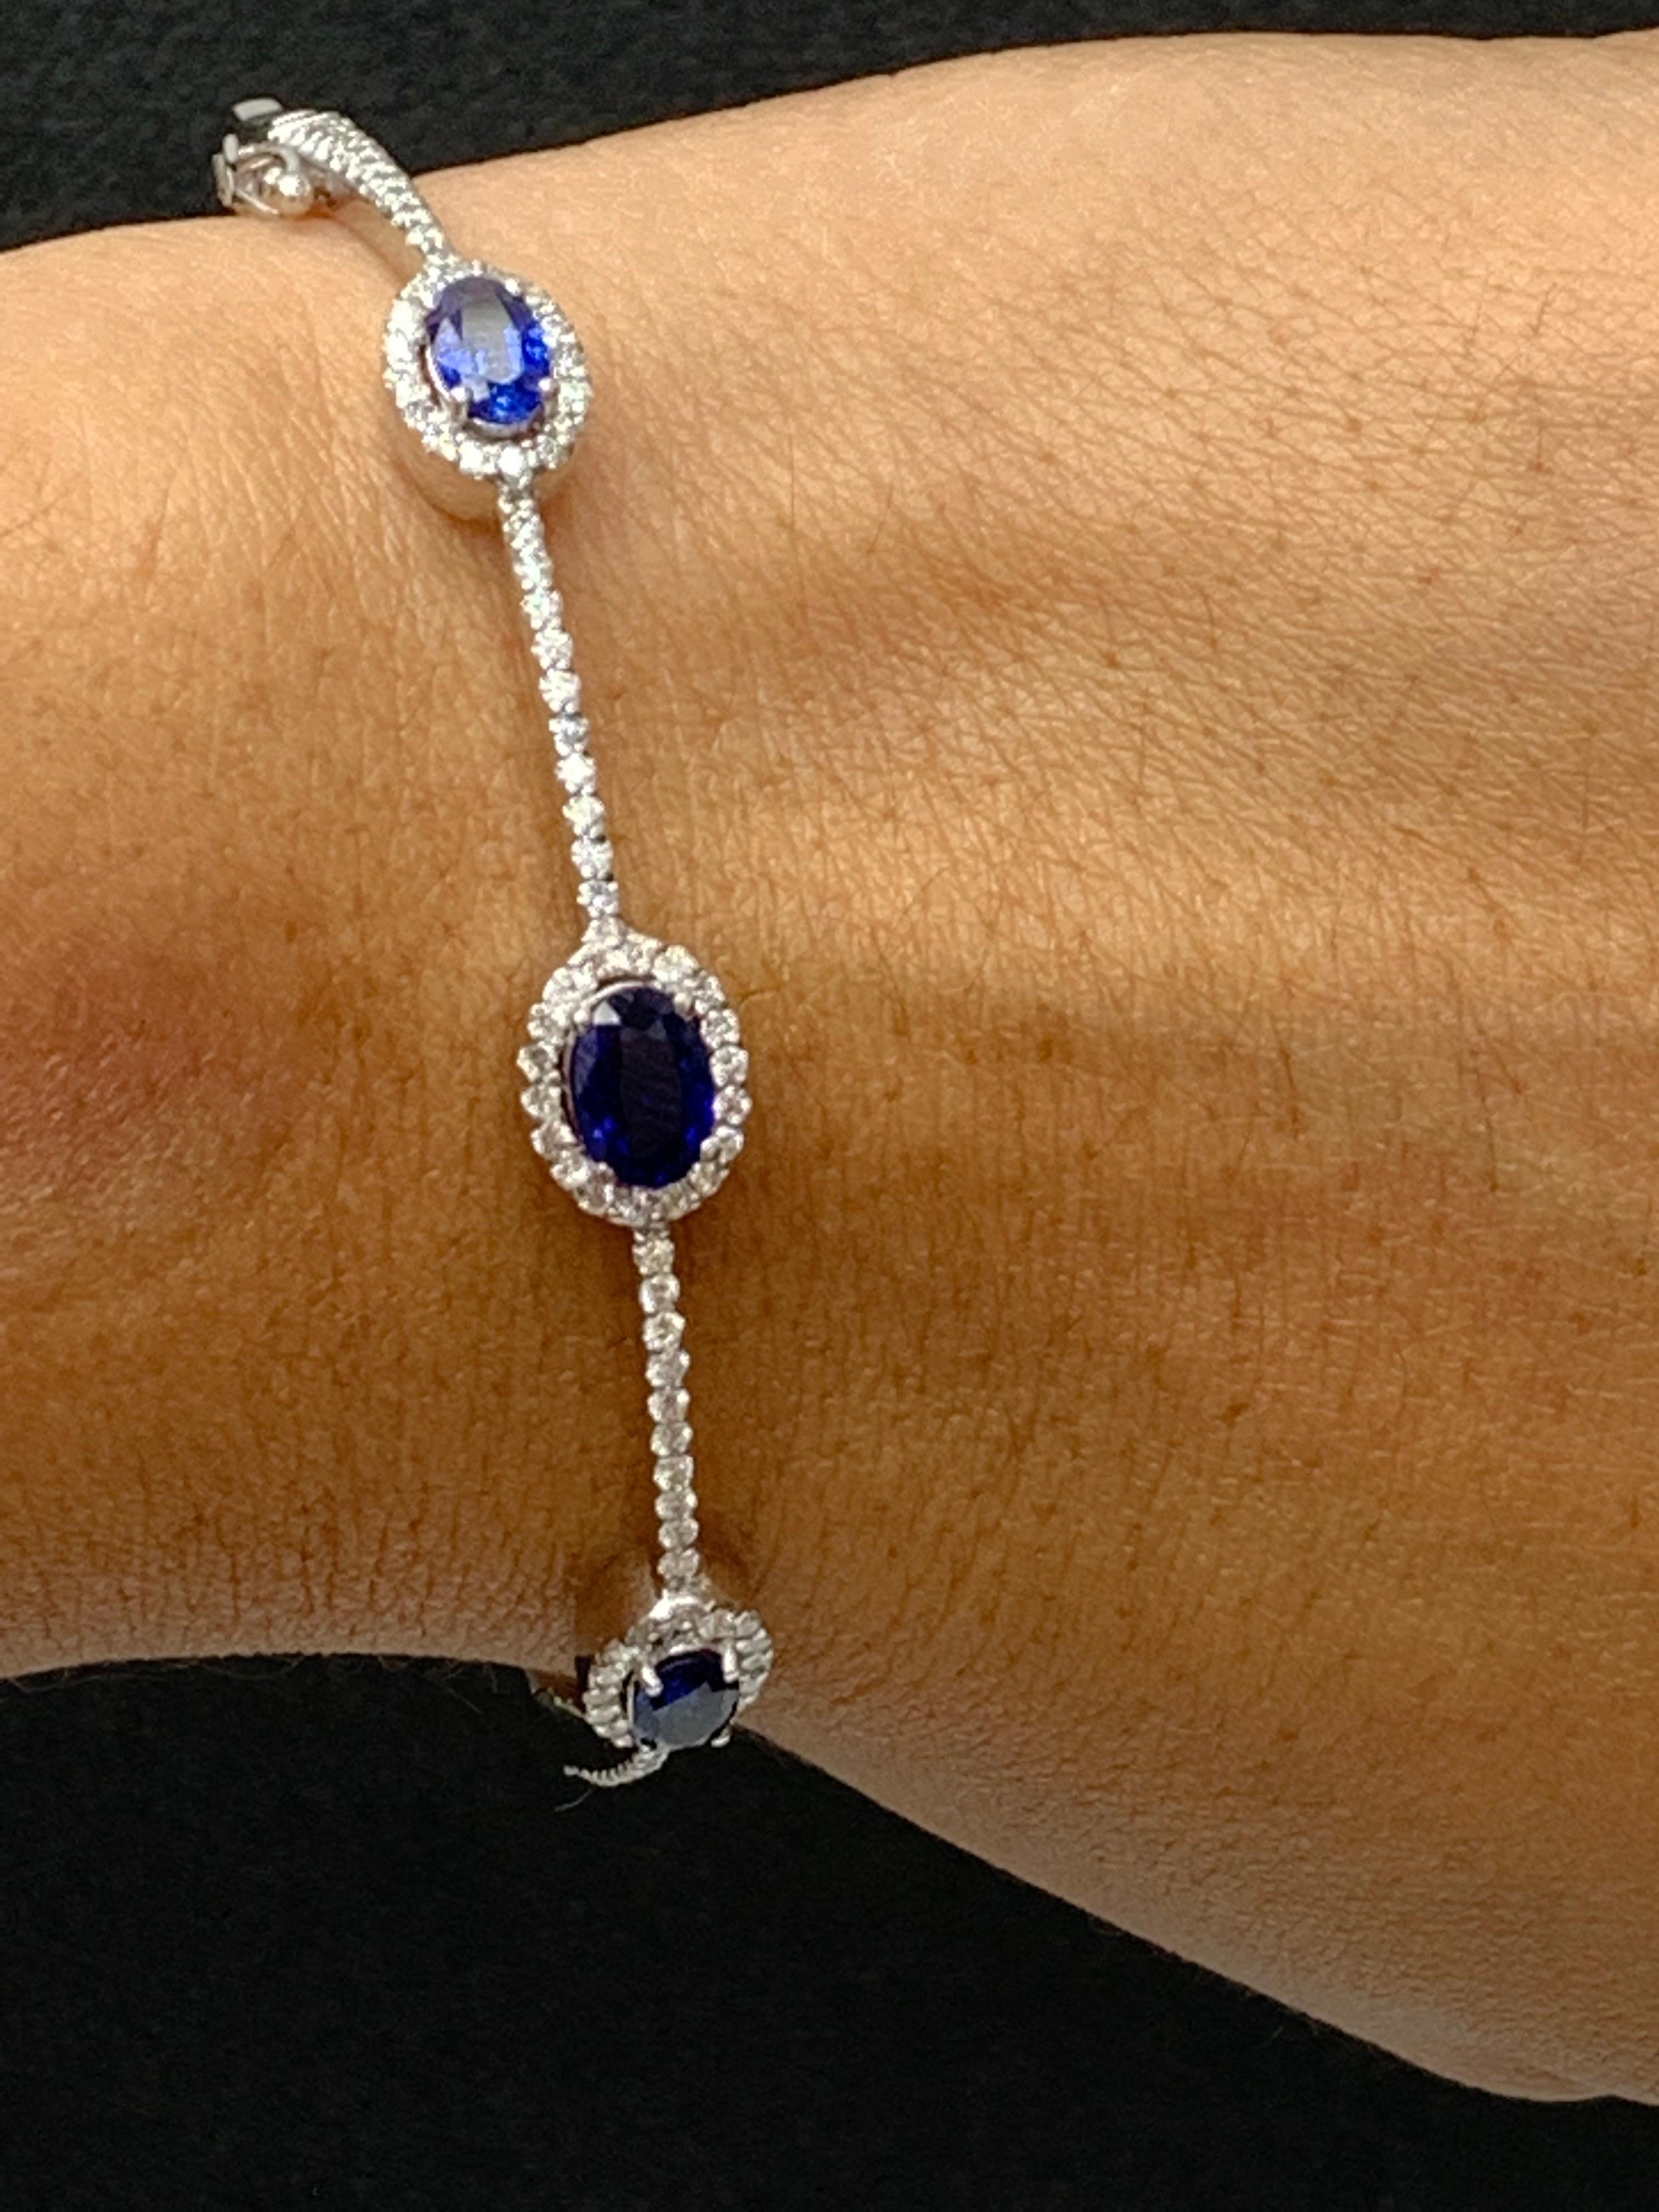 1.80 Carat Oval Cut Sapphire and Diamond Bangle Bracelet in 14K White Gold For Sale 7